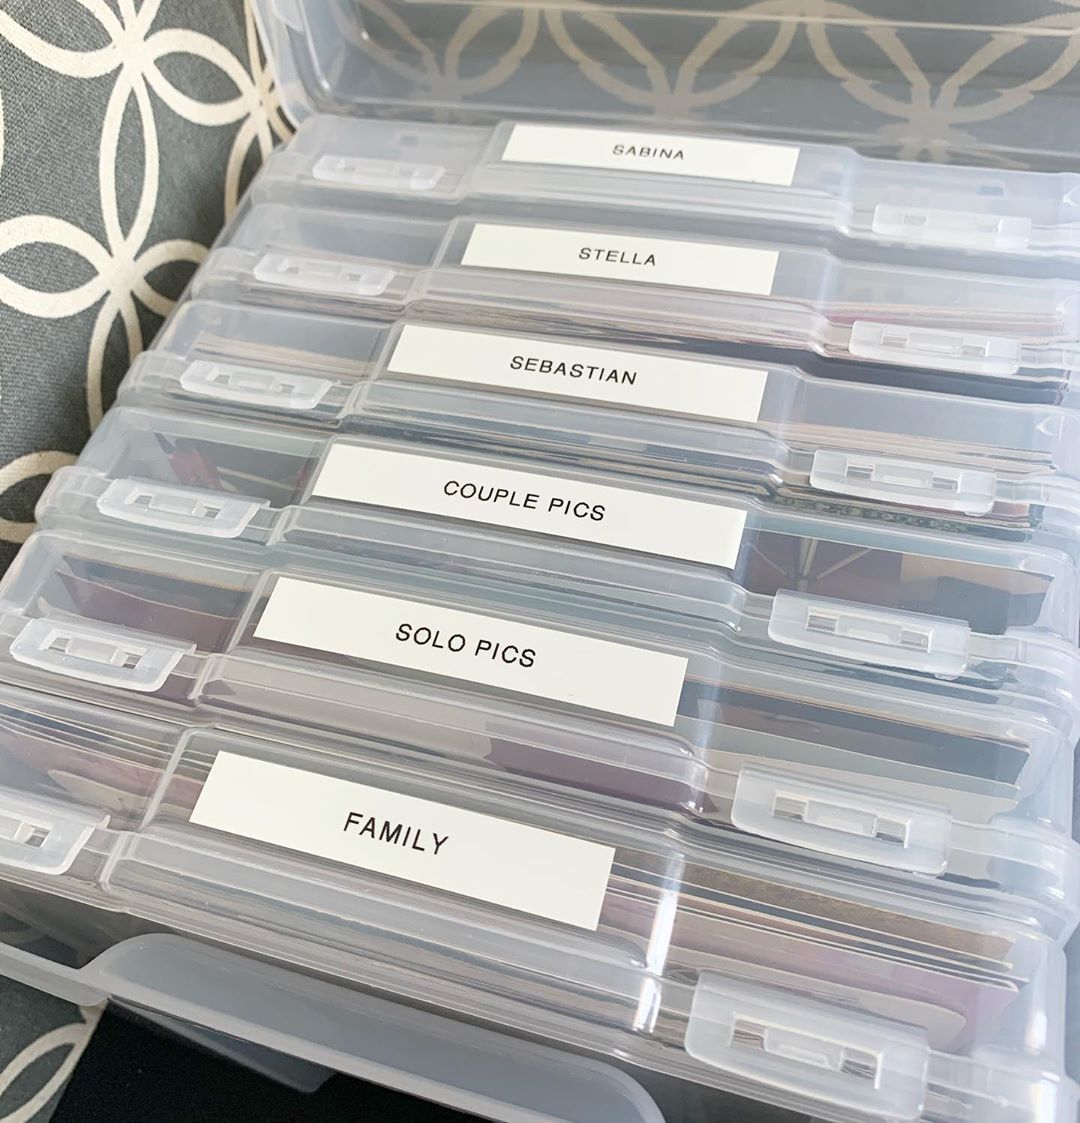 Family Keepsakes Sorted in Clear Plastic Containers. Photo by Instagram user @neatobsessions